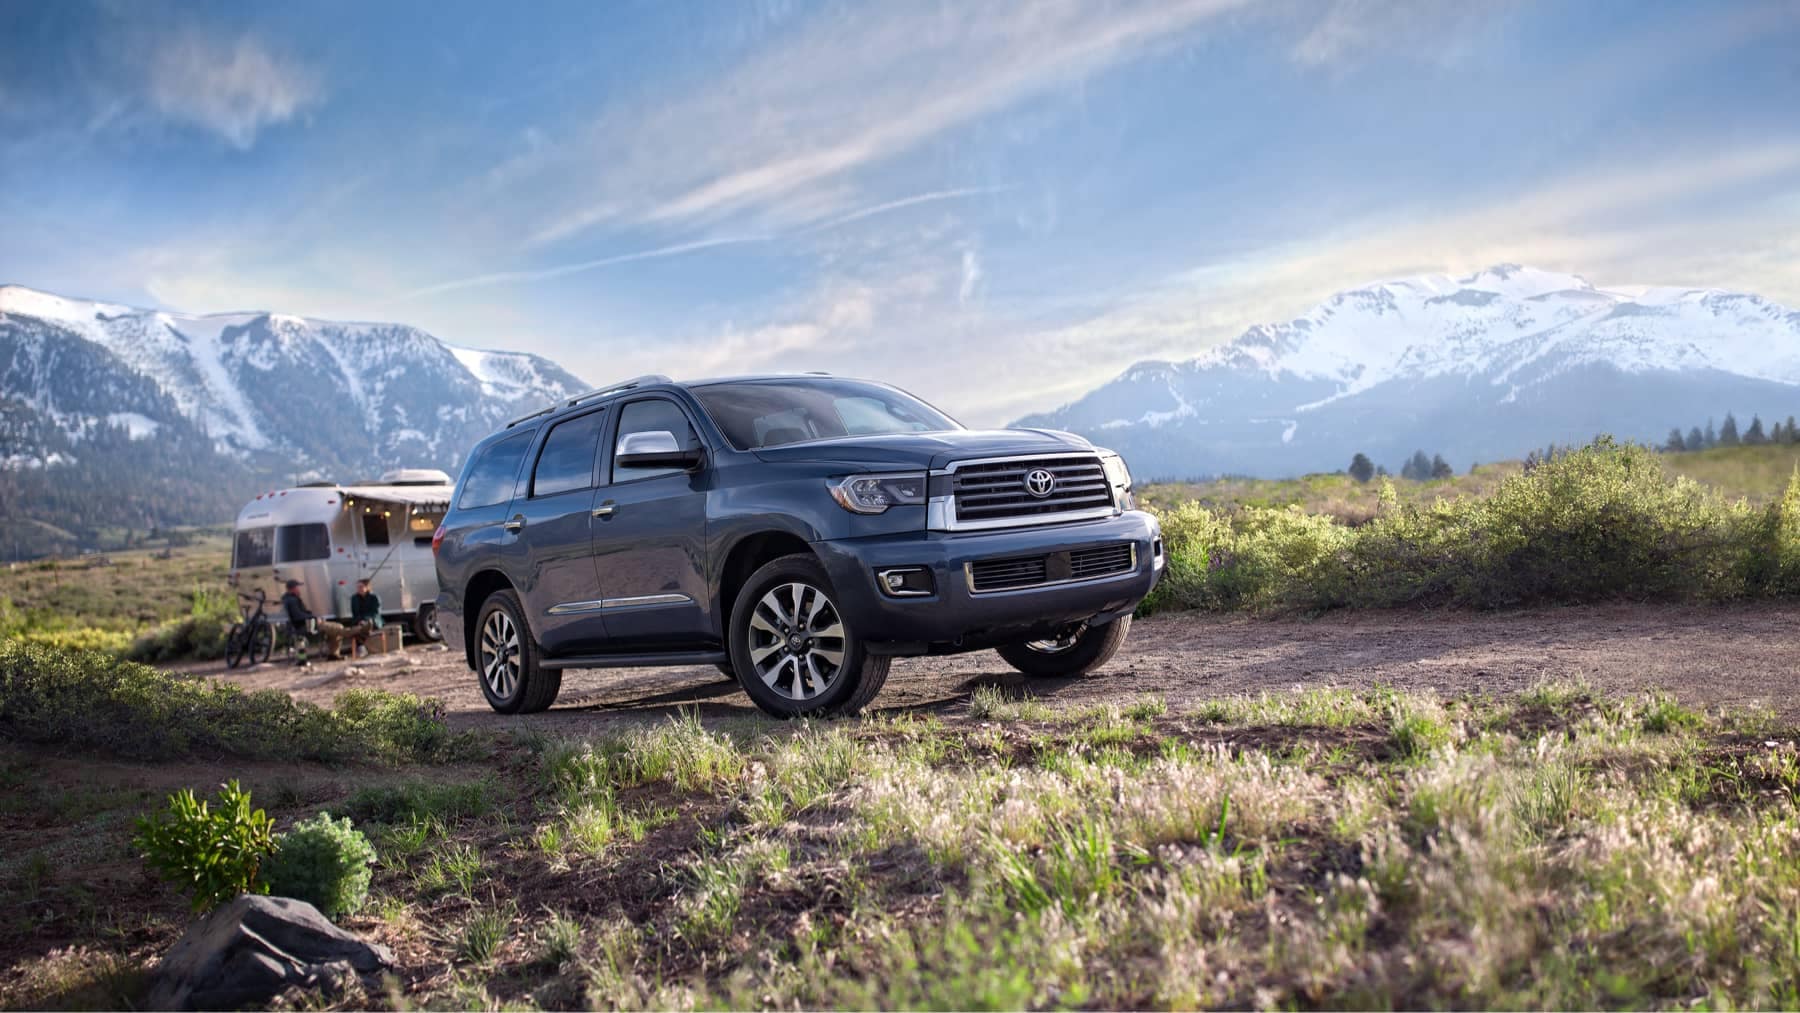 2021 Toyota Sequoia parked by a camper in the mountains